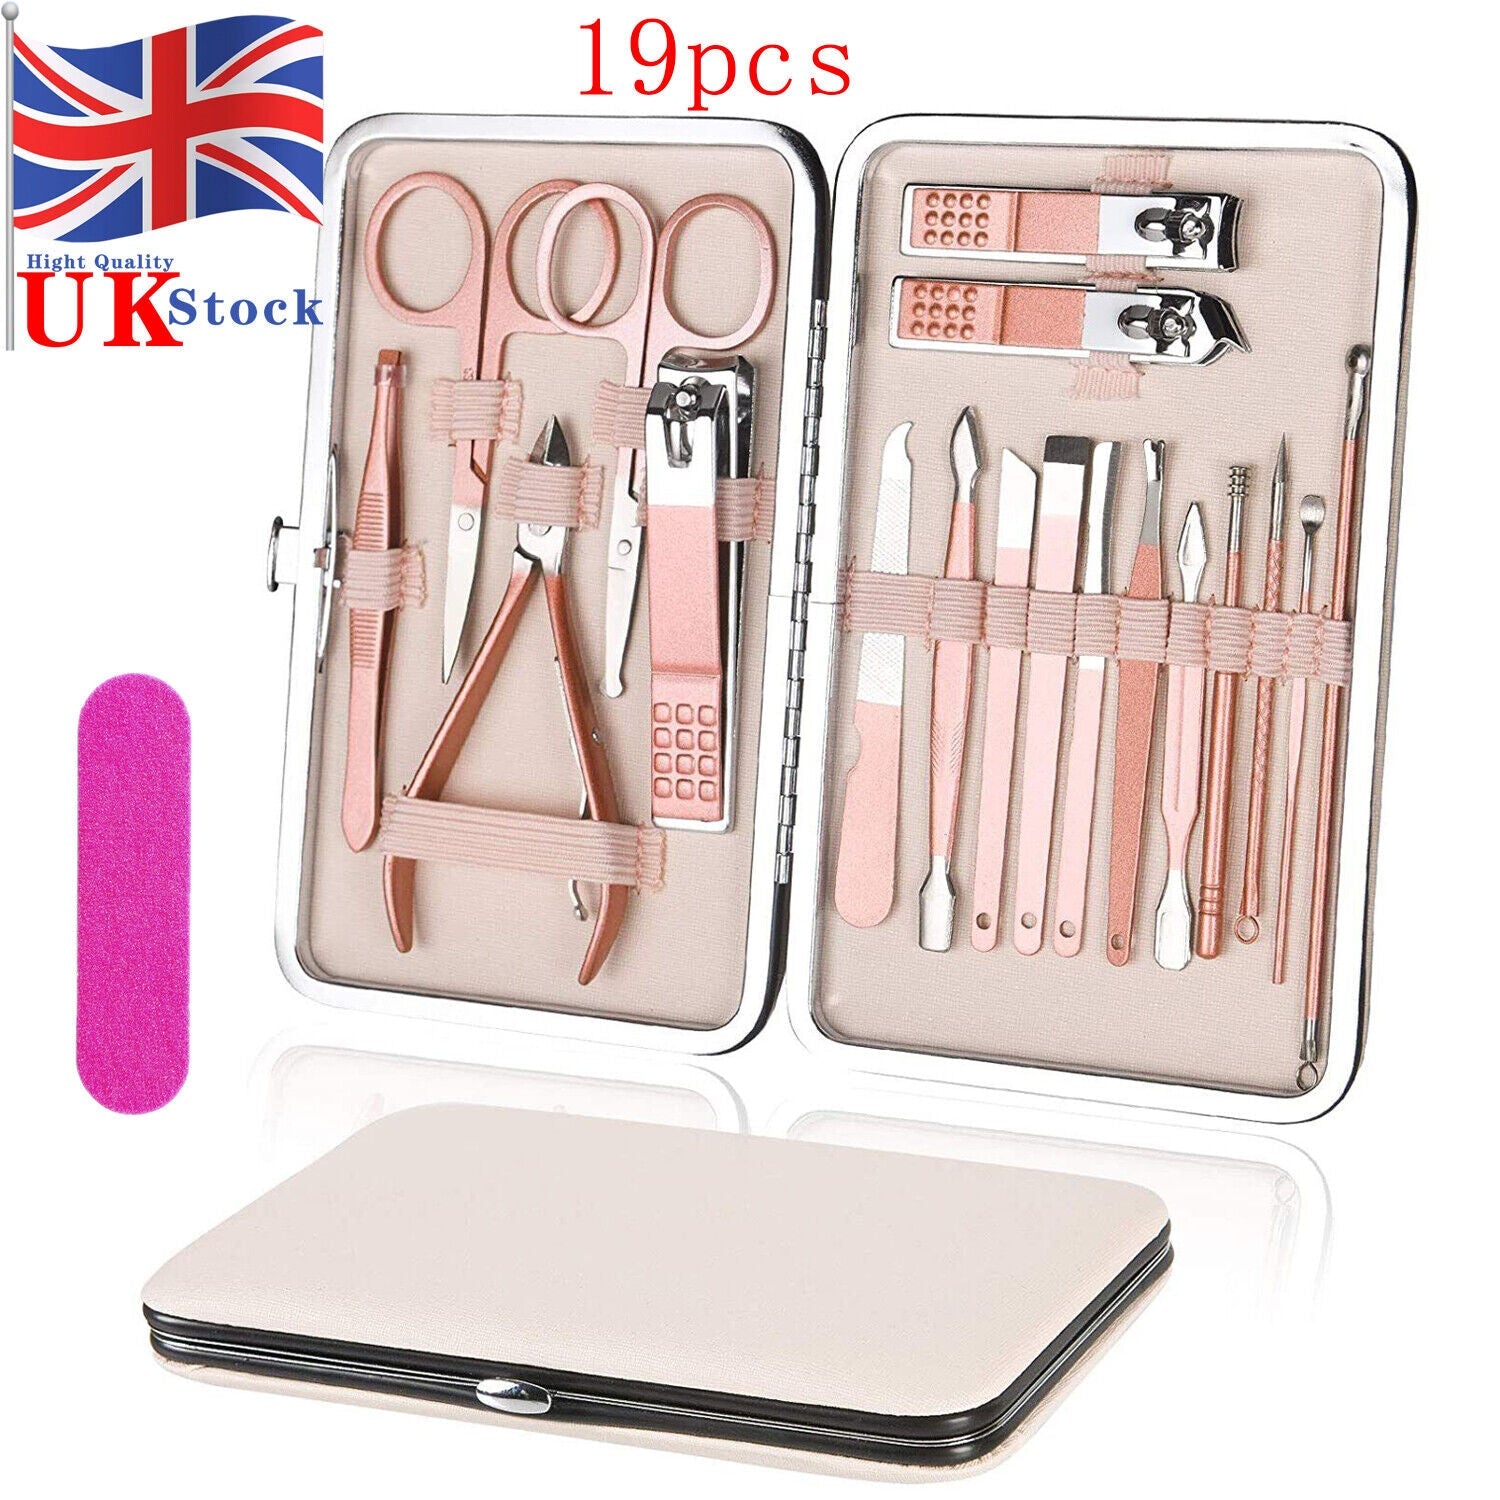 19 Pcs Manicure Kit Pedicure Cuticle Tool Nail Care Clipper Cutter Case Gift Set - Ammpoure Wellbeing